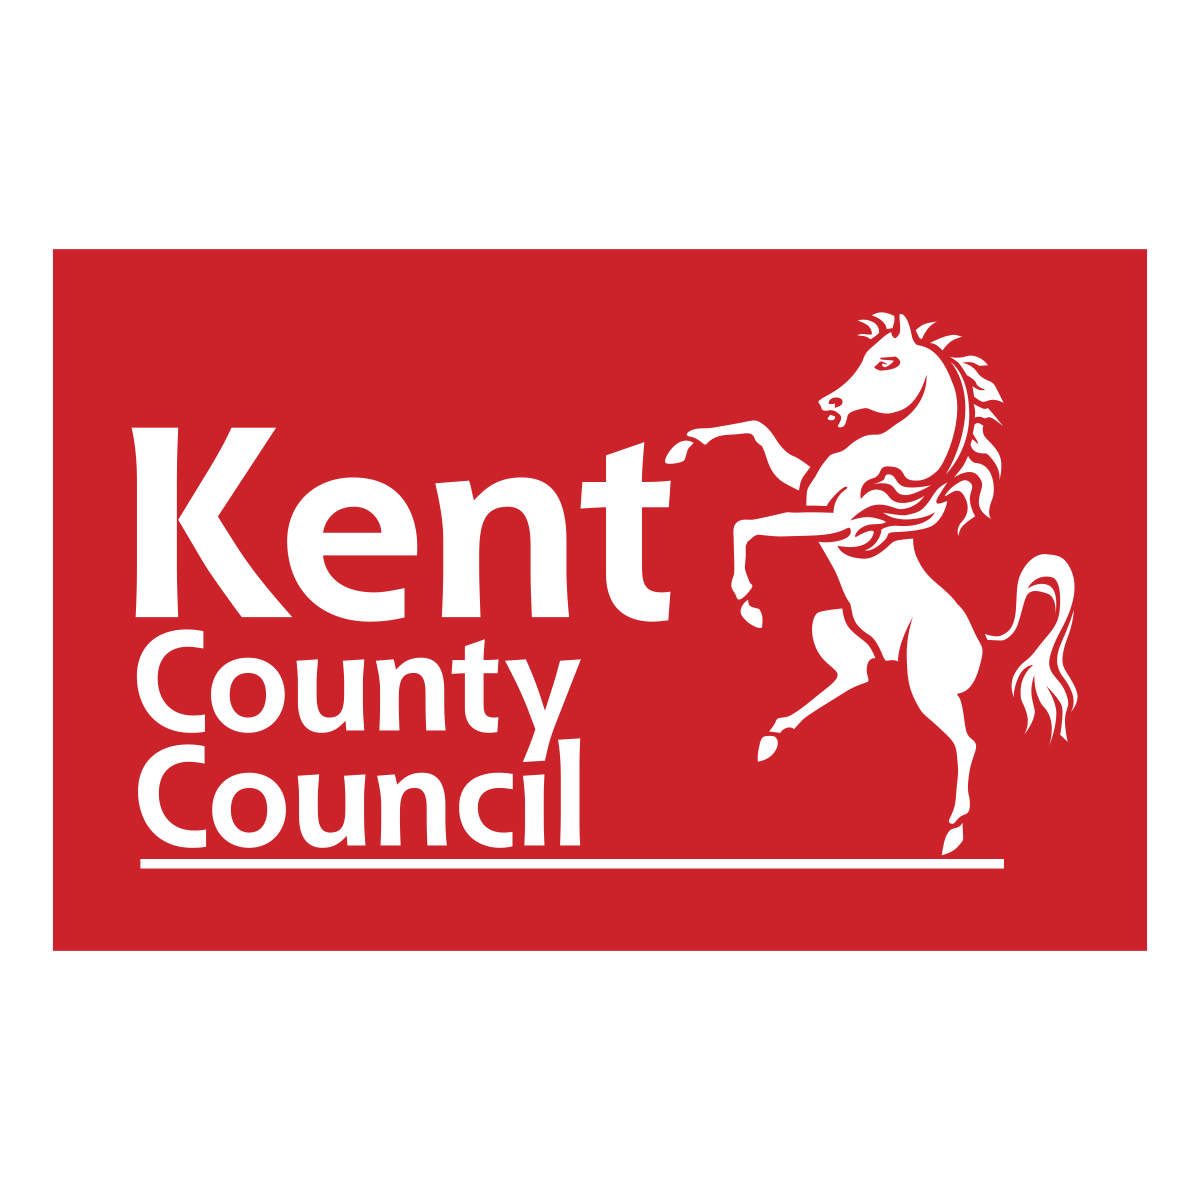 Kent County Council Logo: They funded research and developing surround the composition of Beacons.